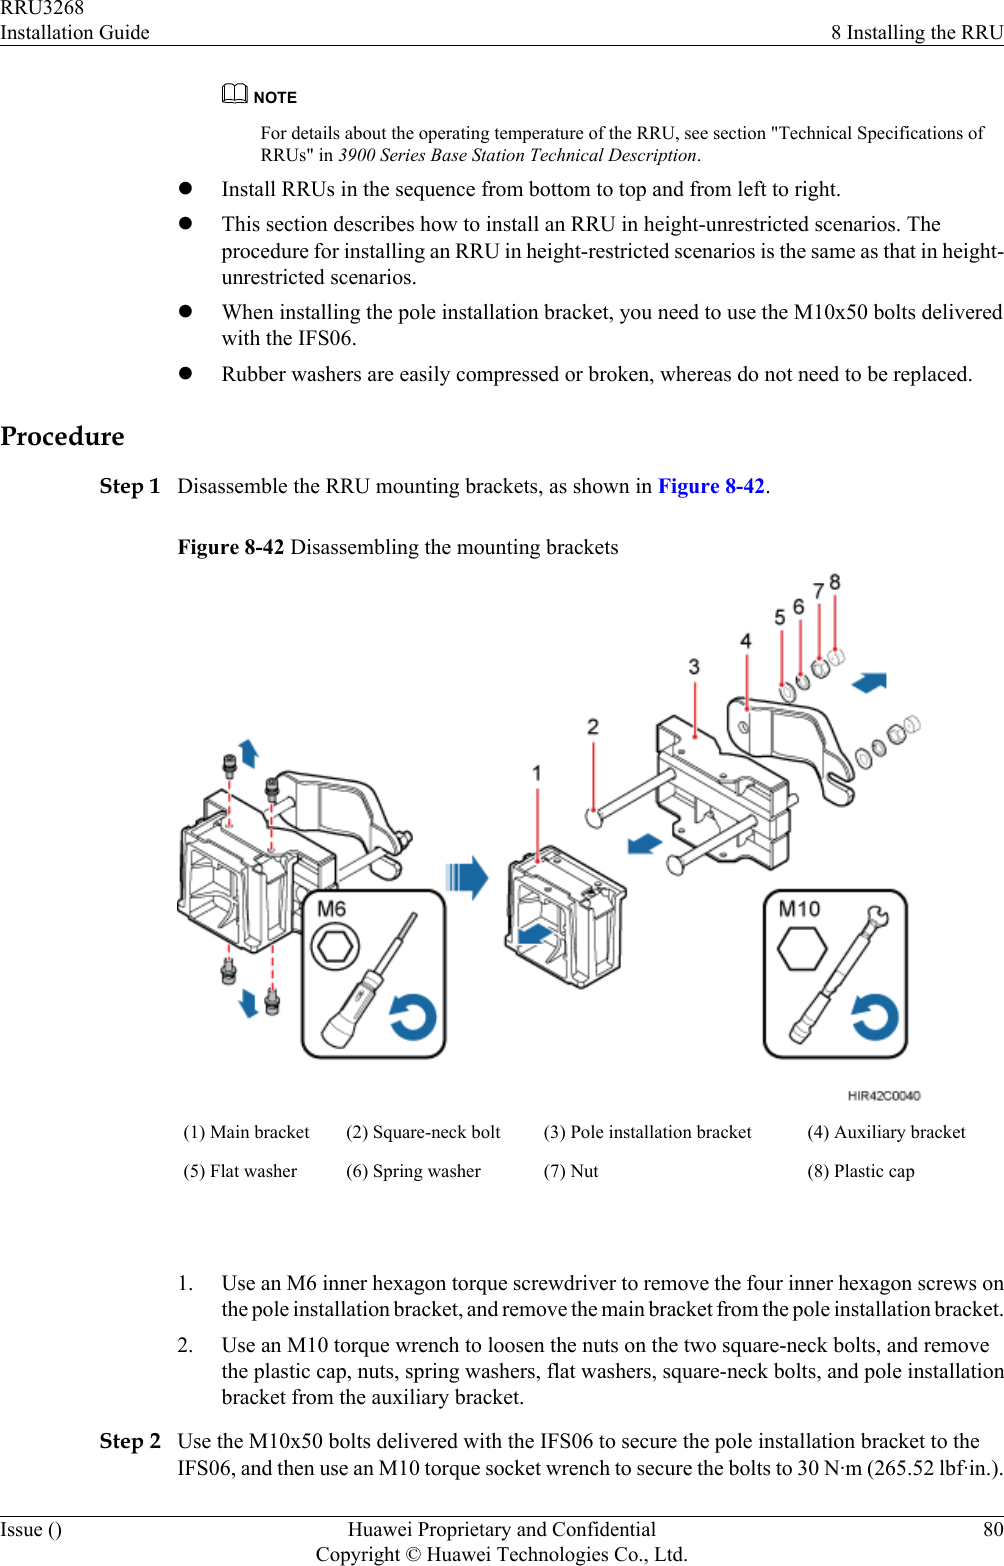 NOTEFor details about the operating temperature of the RRU, see section &quot;Technical Specifications ofRRUs&quot; in 3900 Series Base Station Technical Description.lInstall RRUs in the sequence from bottom to top and from left to right.lThis section describes how to install an RRU in height-unrestricted scenarios. Theprocedure for installing an RRU in height-restricted scenarios is the same as that in height-unrestricted scenarios.lWhen installing the pole installation bracket, you need to use the M10x50 bolts deliveredwith the IFS06.lRubber washers are easily compressed or broken, whereas do not need to be replaced.ProcedureStep 1 Disassemble the RRU mounting brackets, as shown in Figure 8-42.Figure 8-42 Disassembling the mounting brackets(1) Main bracket (2) Square-neck bolt (3) Pole installation bracket (4) Auxiliary bracket(5) Flat washer (6) Spring washer (7) Nut (8) Plastic cap 1. Use an M6 inner hexagon torque screwdriver to remove the four inner hexagon screws onthe pole installation bracket, and remove the main bracket from the pole installation bracket.2. Use an M10 torque wrench to loosen the nuts on the two square-neck bolts, and removethe plastic cap, nuts, spring washers, flat washers, square-neck bolts, and pole installationbracket from the auxiliary bracket.Step 2 Use the M10x50 bolts delivered with the IFS06 to secure the pole installation bracket to theIFS06, and then use an M10 torque socket wrench to secure the bolts to 30 N·m (265.52 lbf·in.).RRU3268Installation Guide 8 Installing the RRUIssue () Huawei Proprietary and ConfidentialCopyright © Huawei Technologies Co., Ltd.80